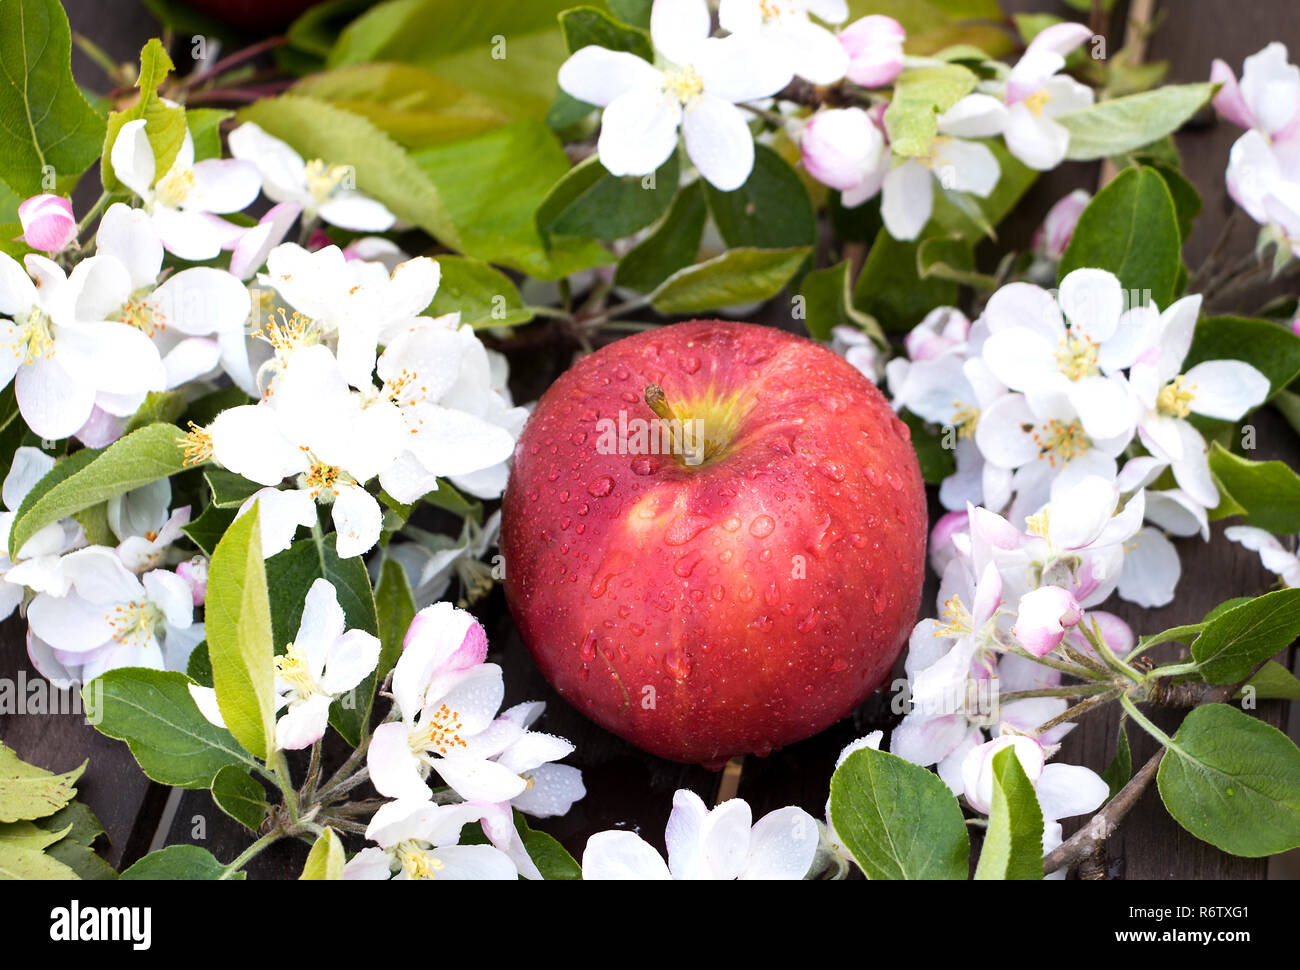 red apple surrounded by apple blossoms Stock Photo